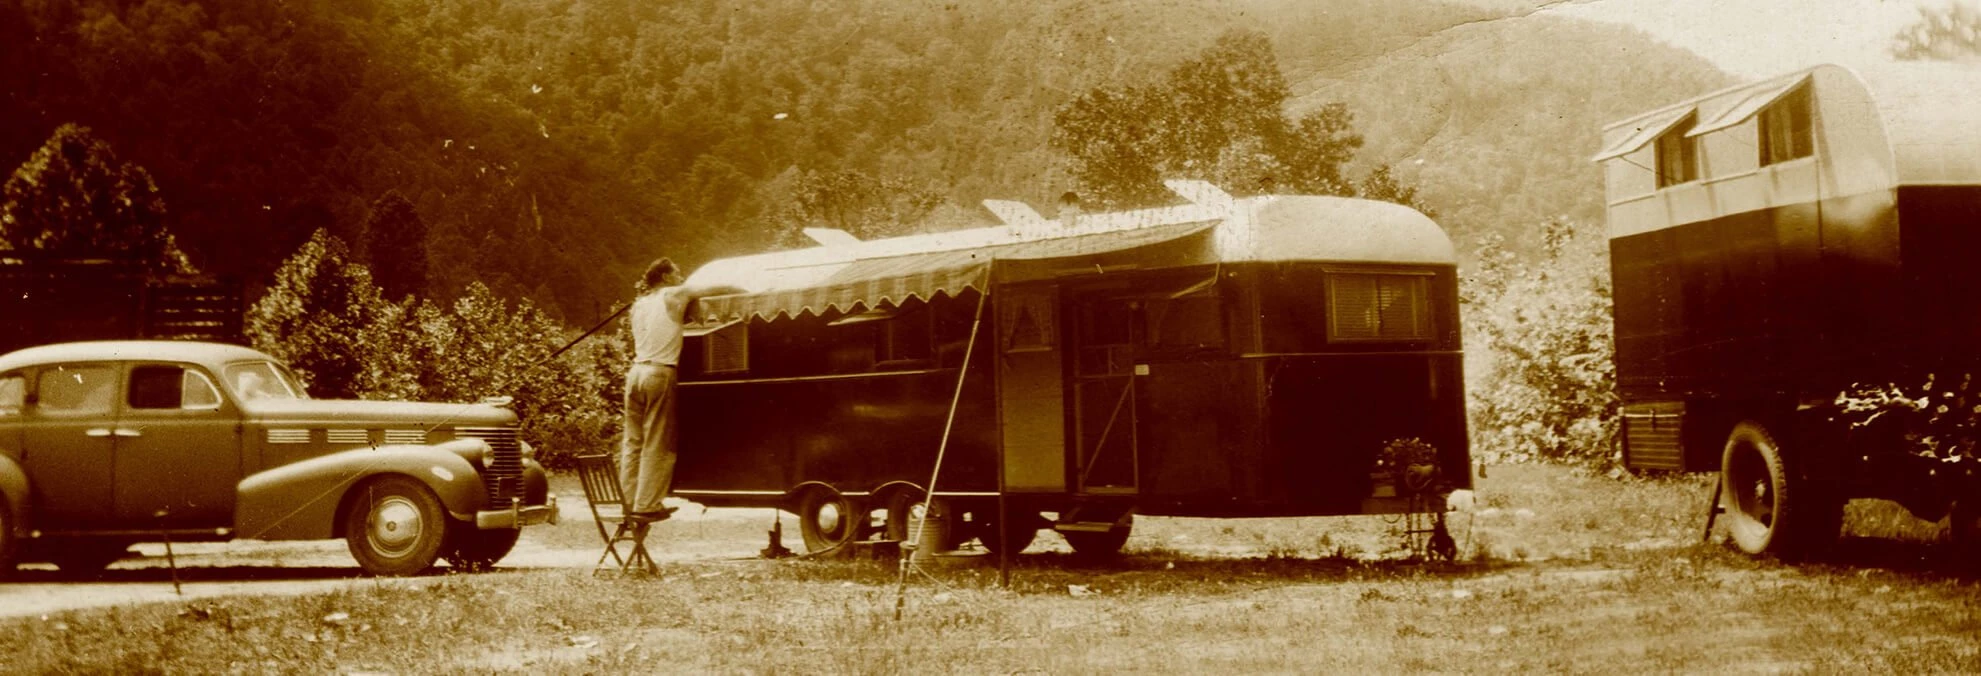 Two sleeping trailers are parked in the valley, mountains can be seen in the background, blocking the sky. A man stands on a wooden folding chair to attach or fix an awning attached to one of the trailers. A car is parked on the left.